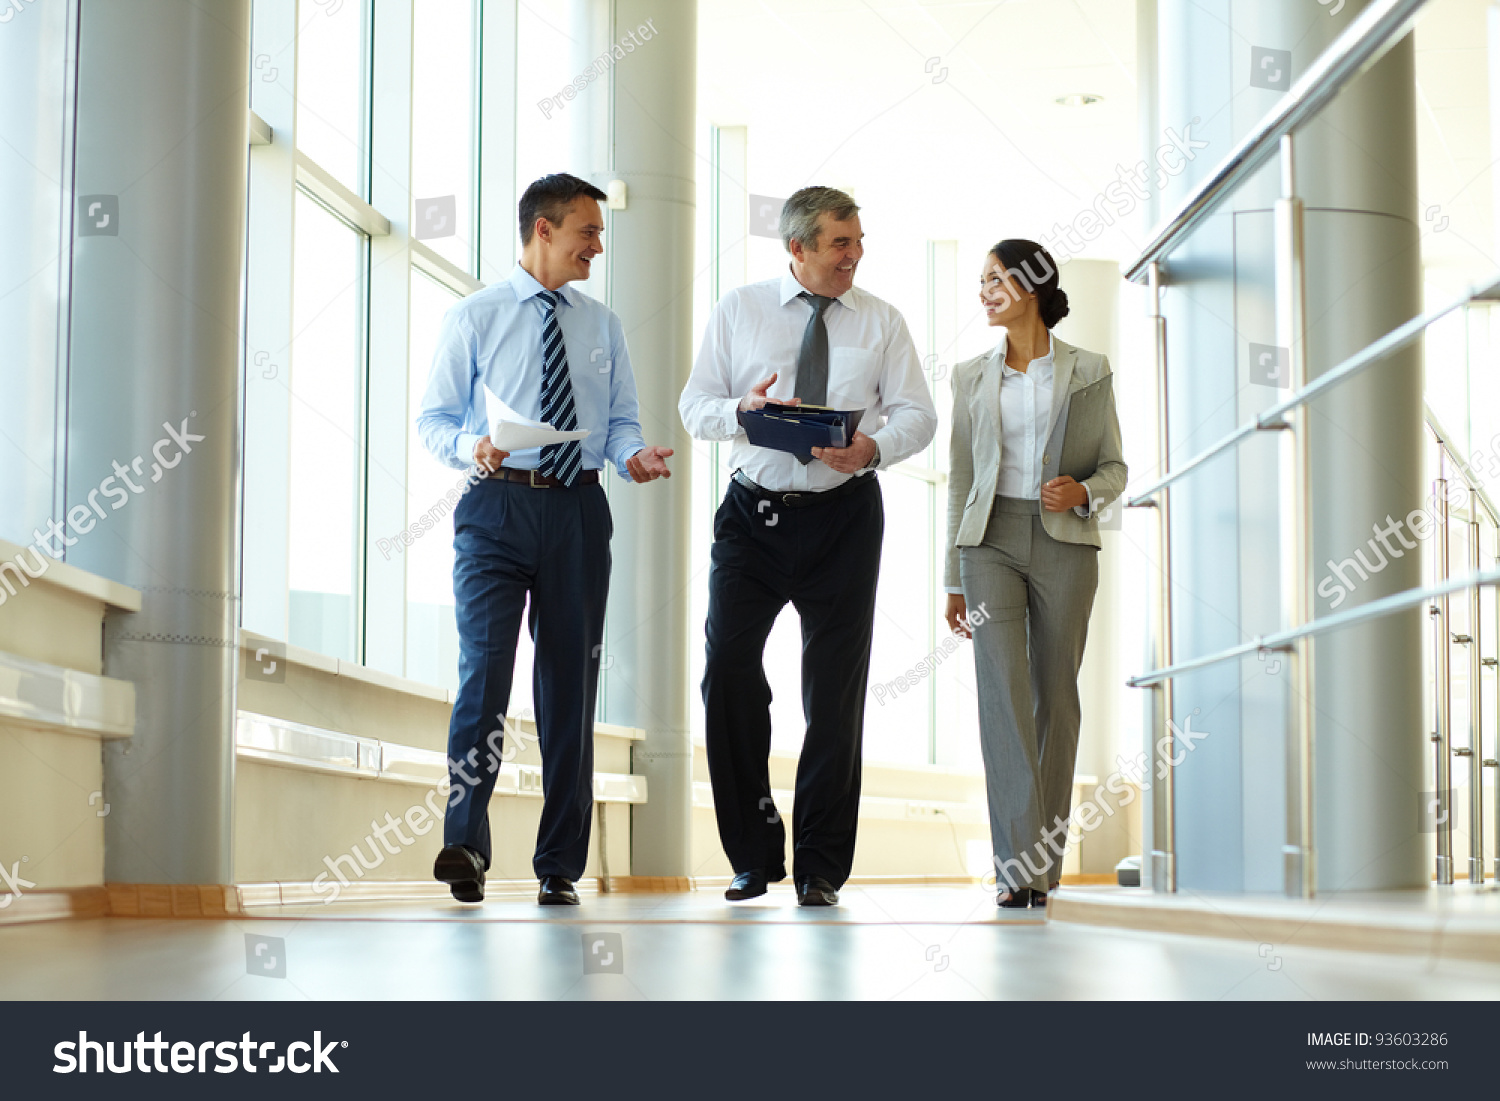 Confident business partners walking down in office building and discussing work #93603286